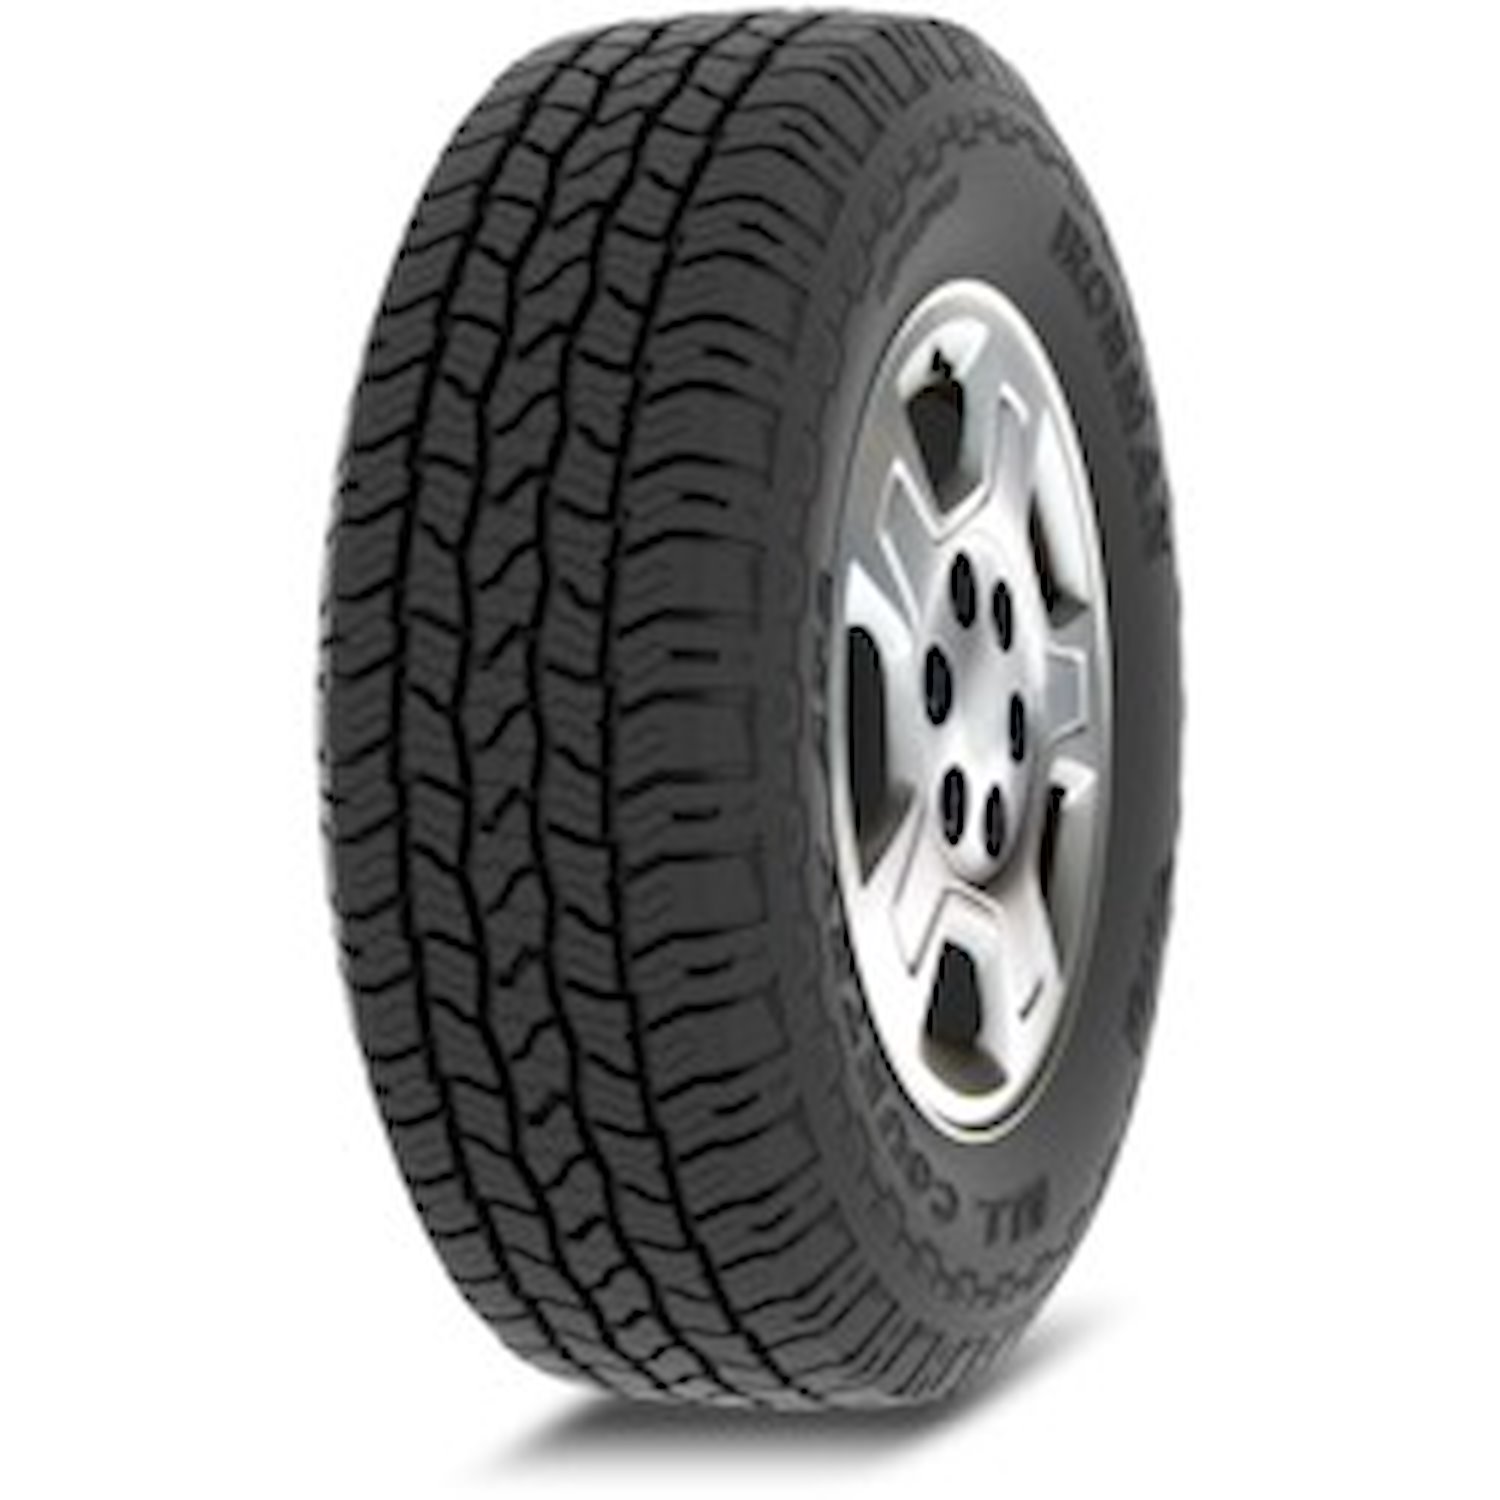 07682 All Country AT2 Tire, LT245/75R17, 121/118S